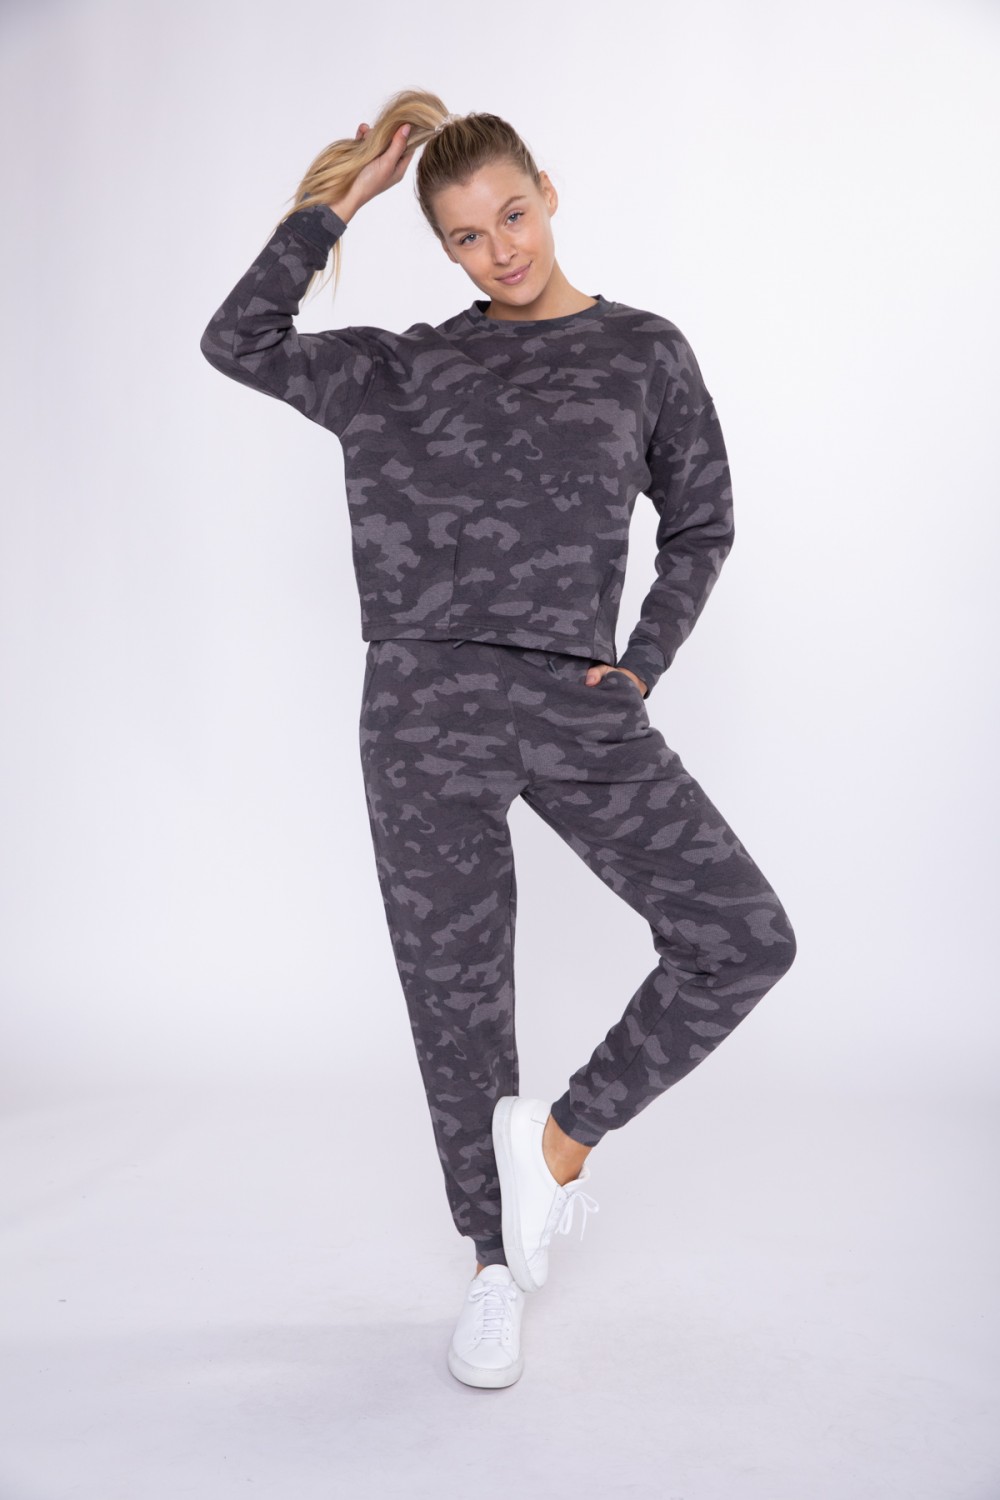 Relaxed Fit & Dark Camo print set